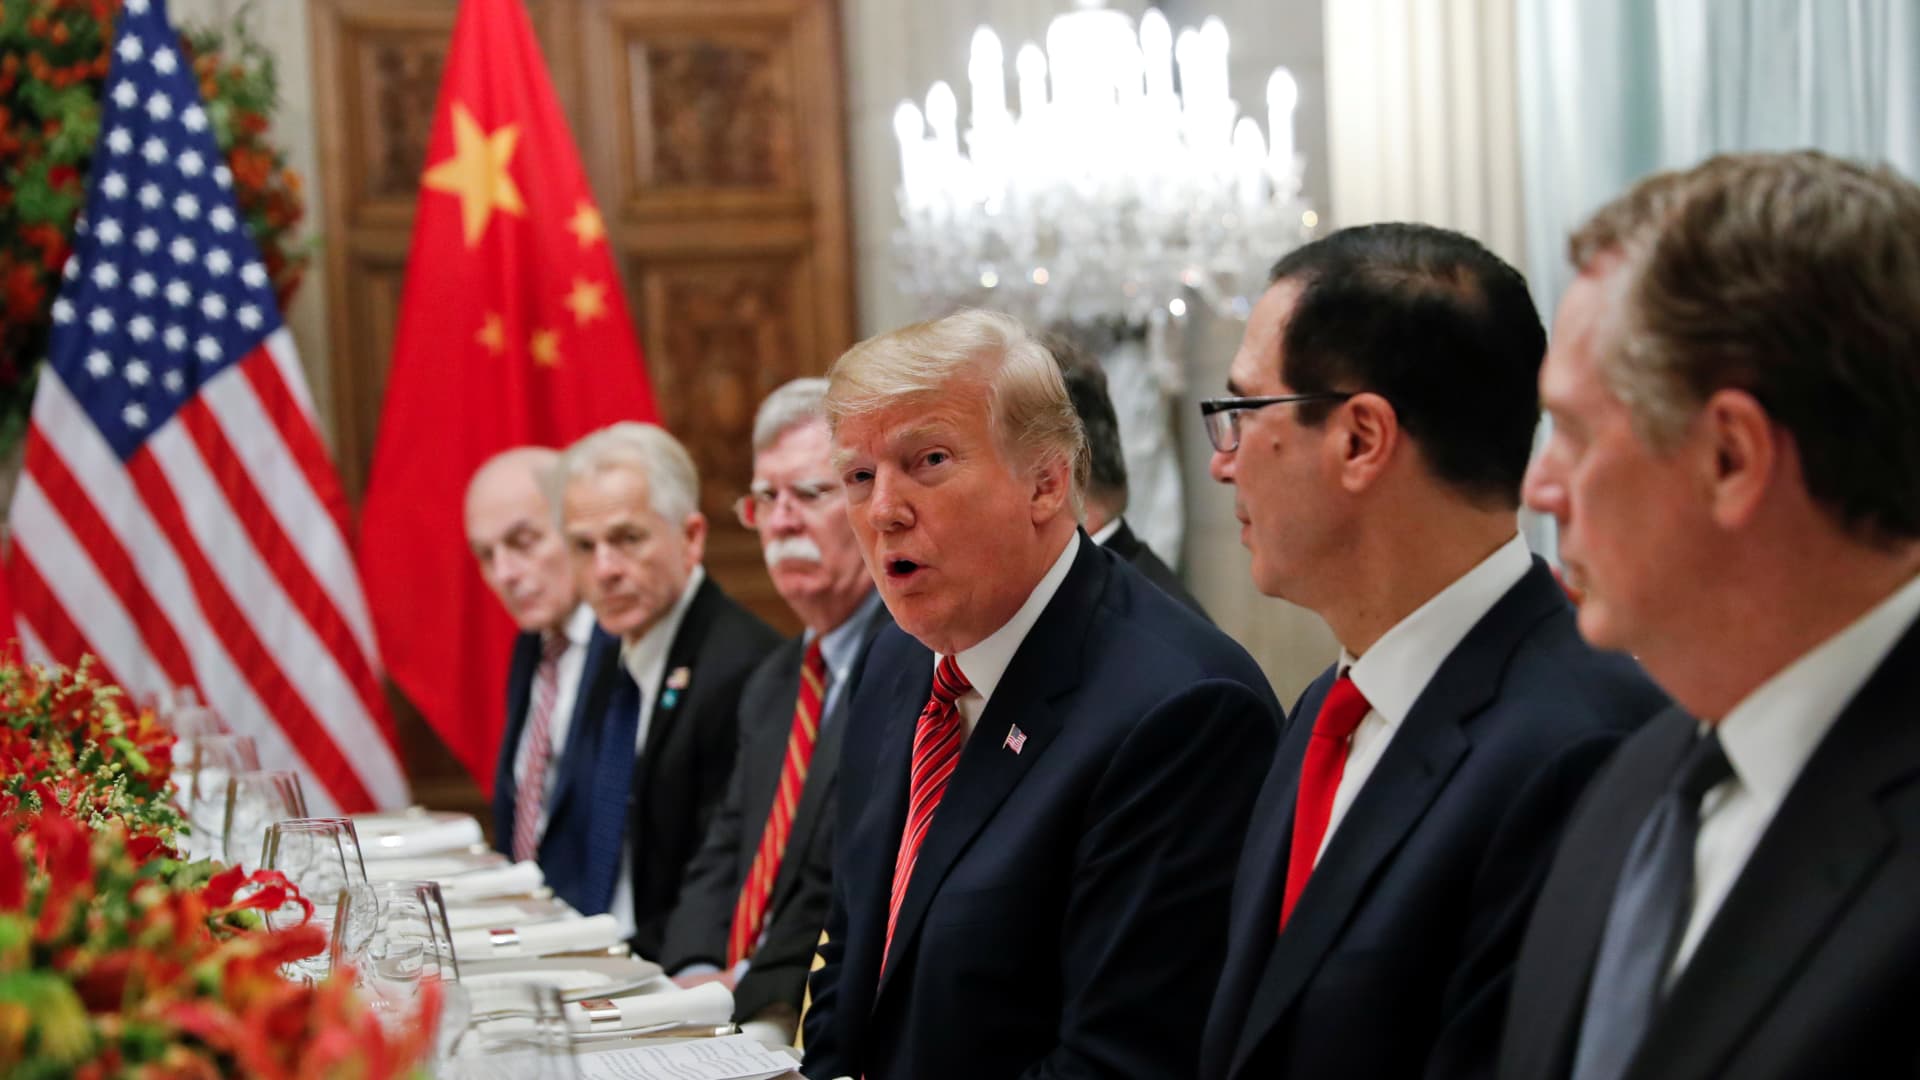 President Donald Trump, U.S. President Donald Trump's national security adviser John Bolton, U.S. Treasury Secretary Steven Mnuchin attend a working dinner with Chinese President Xi Jinping after the G20 leaders summit in Buenos Aires, Argentina December 1, 2018. 